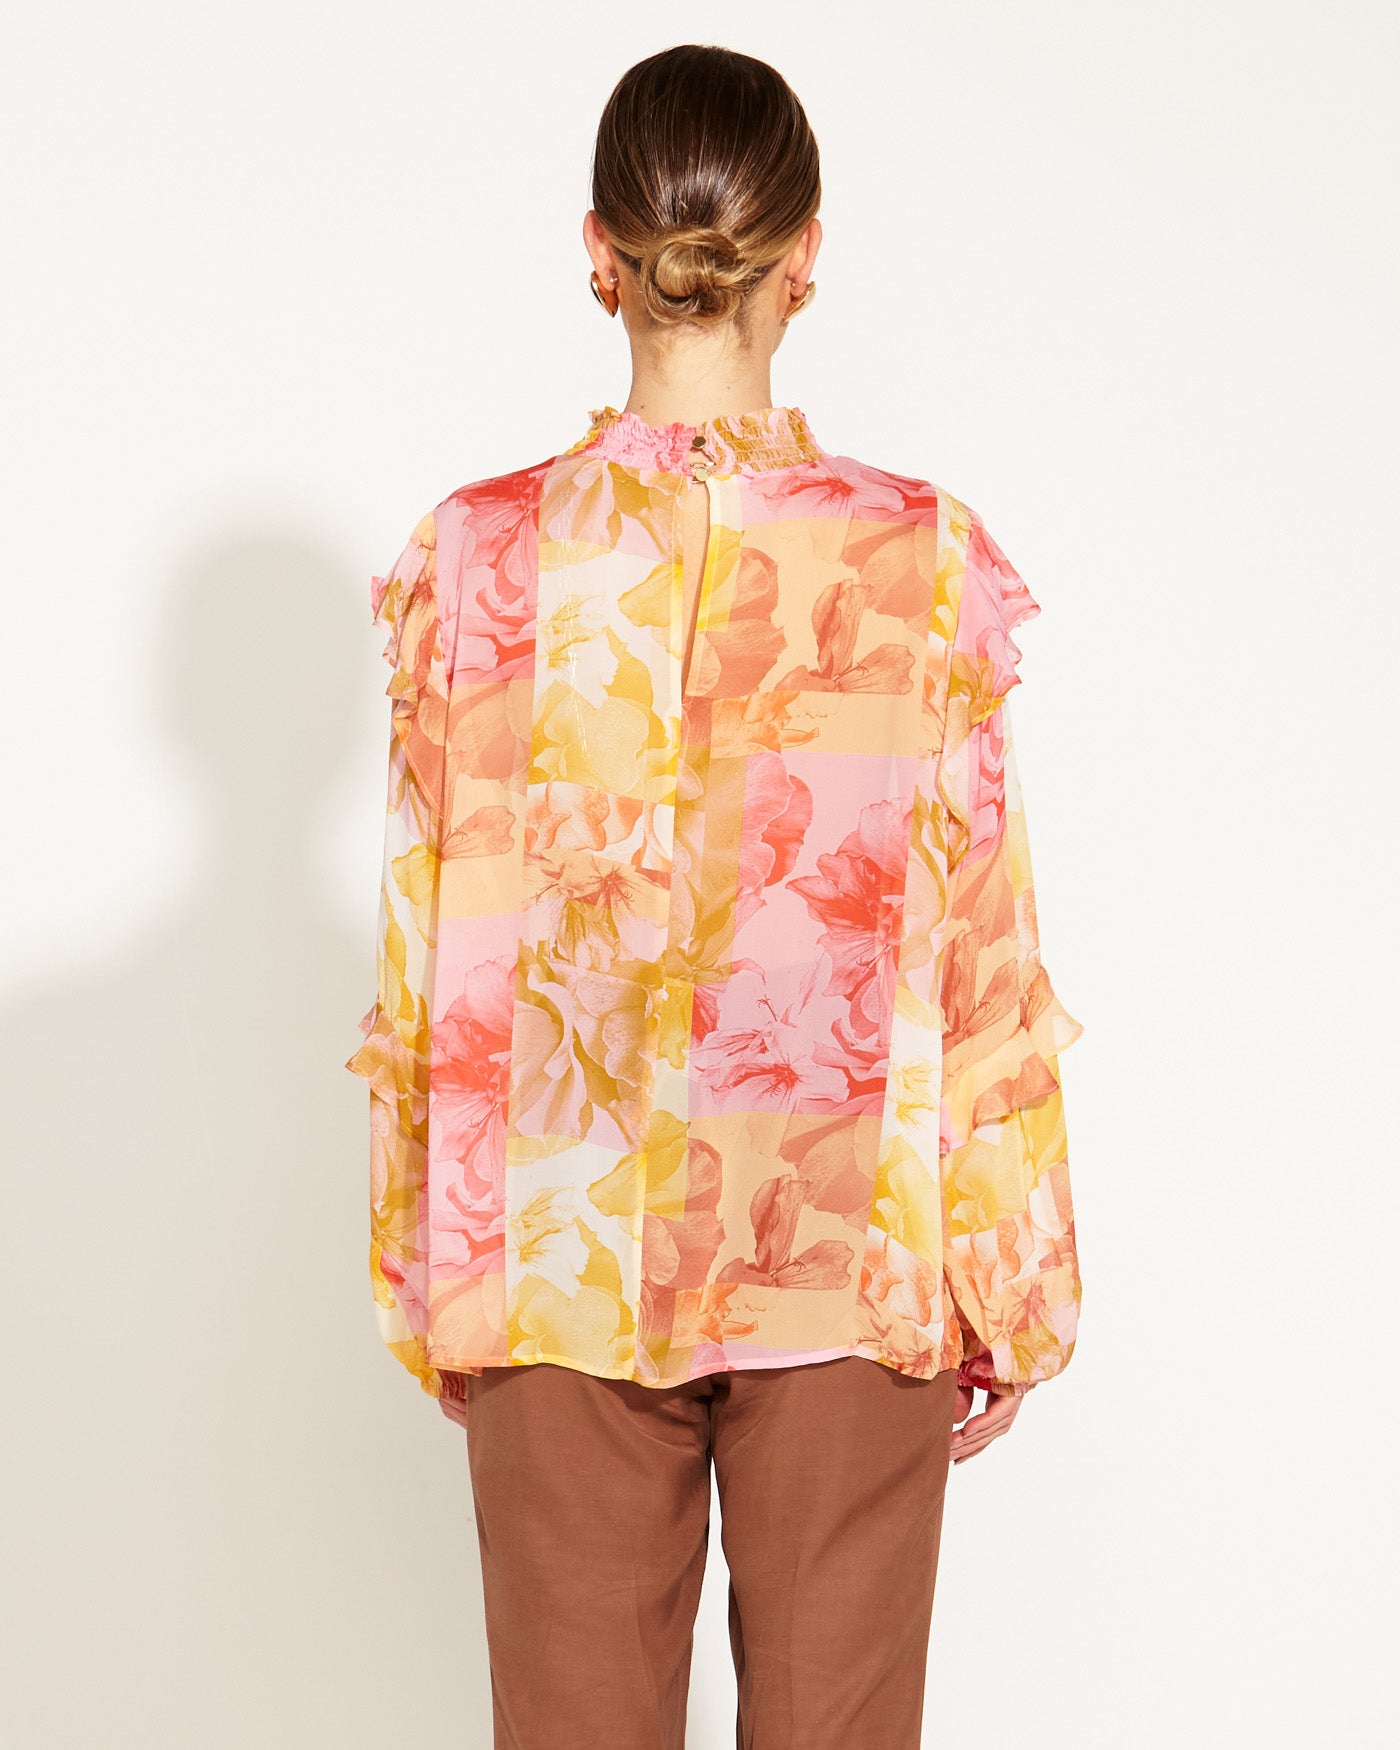 Fate+Becker Earthly Paradise Long Sleeve Sheer Blouse - Paradise Floral